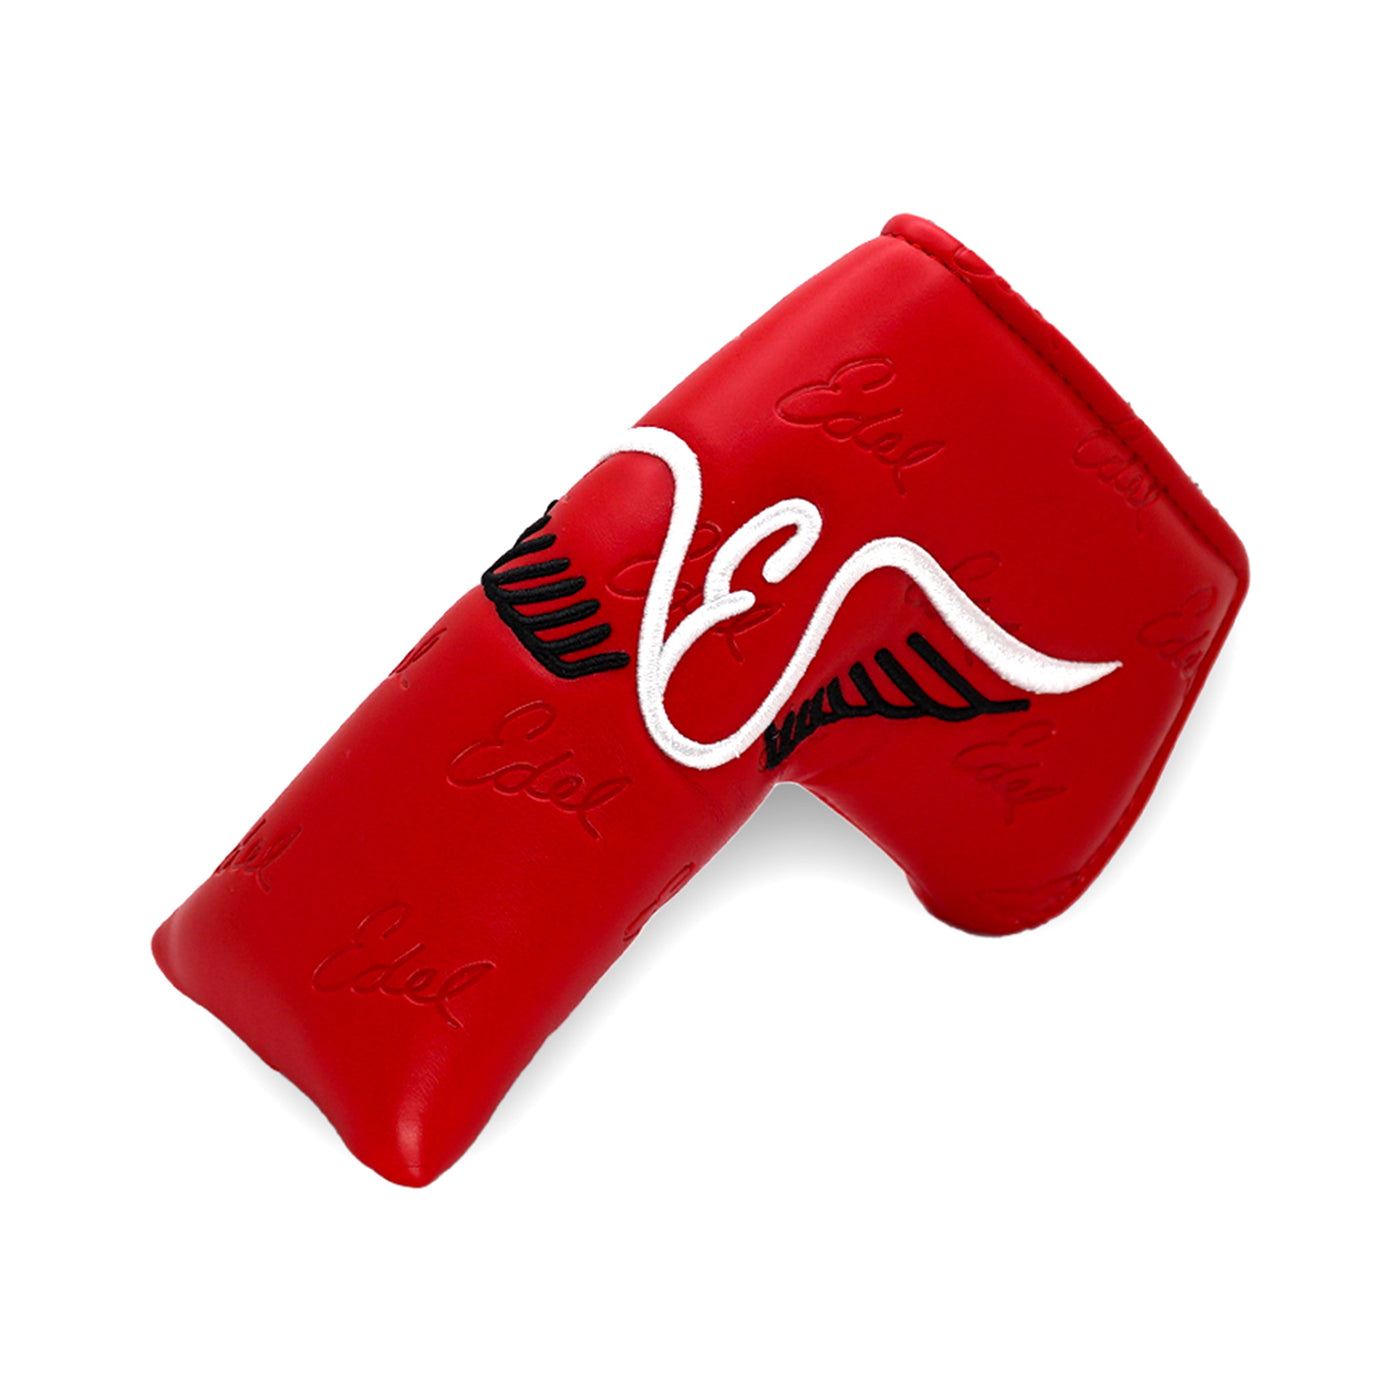 Edel Red Blade Putter Cover